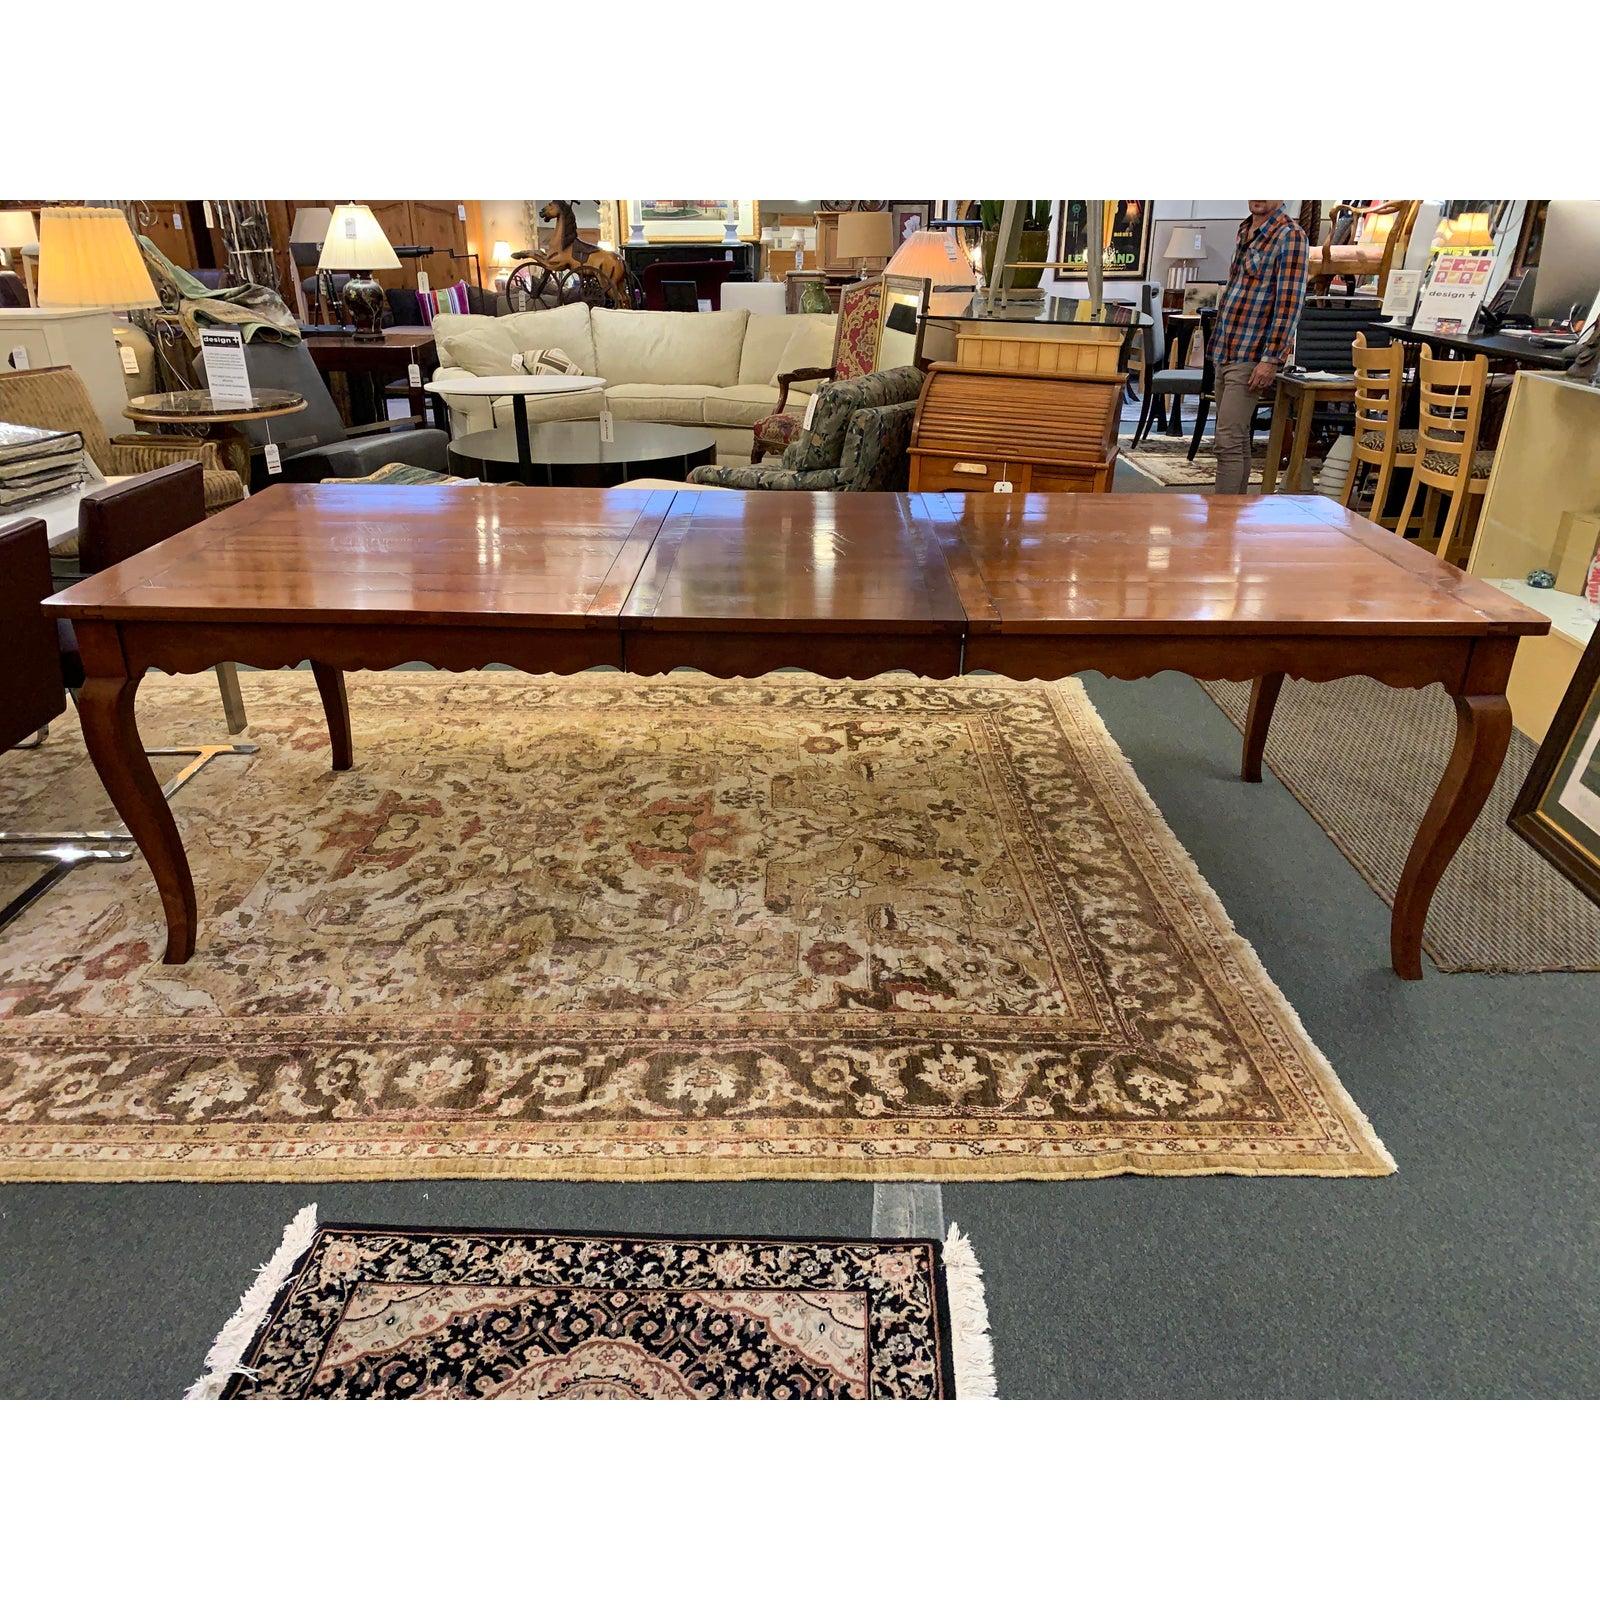 Wright Furniture Company Extension Table and Chippendale Style Chair Dining Set In Good Condition For Sale In San Francisco, CA